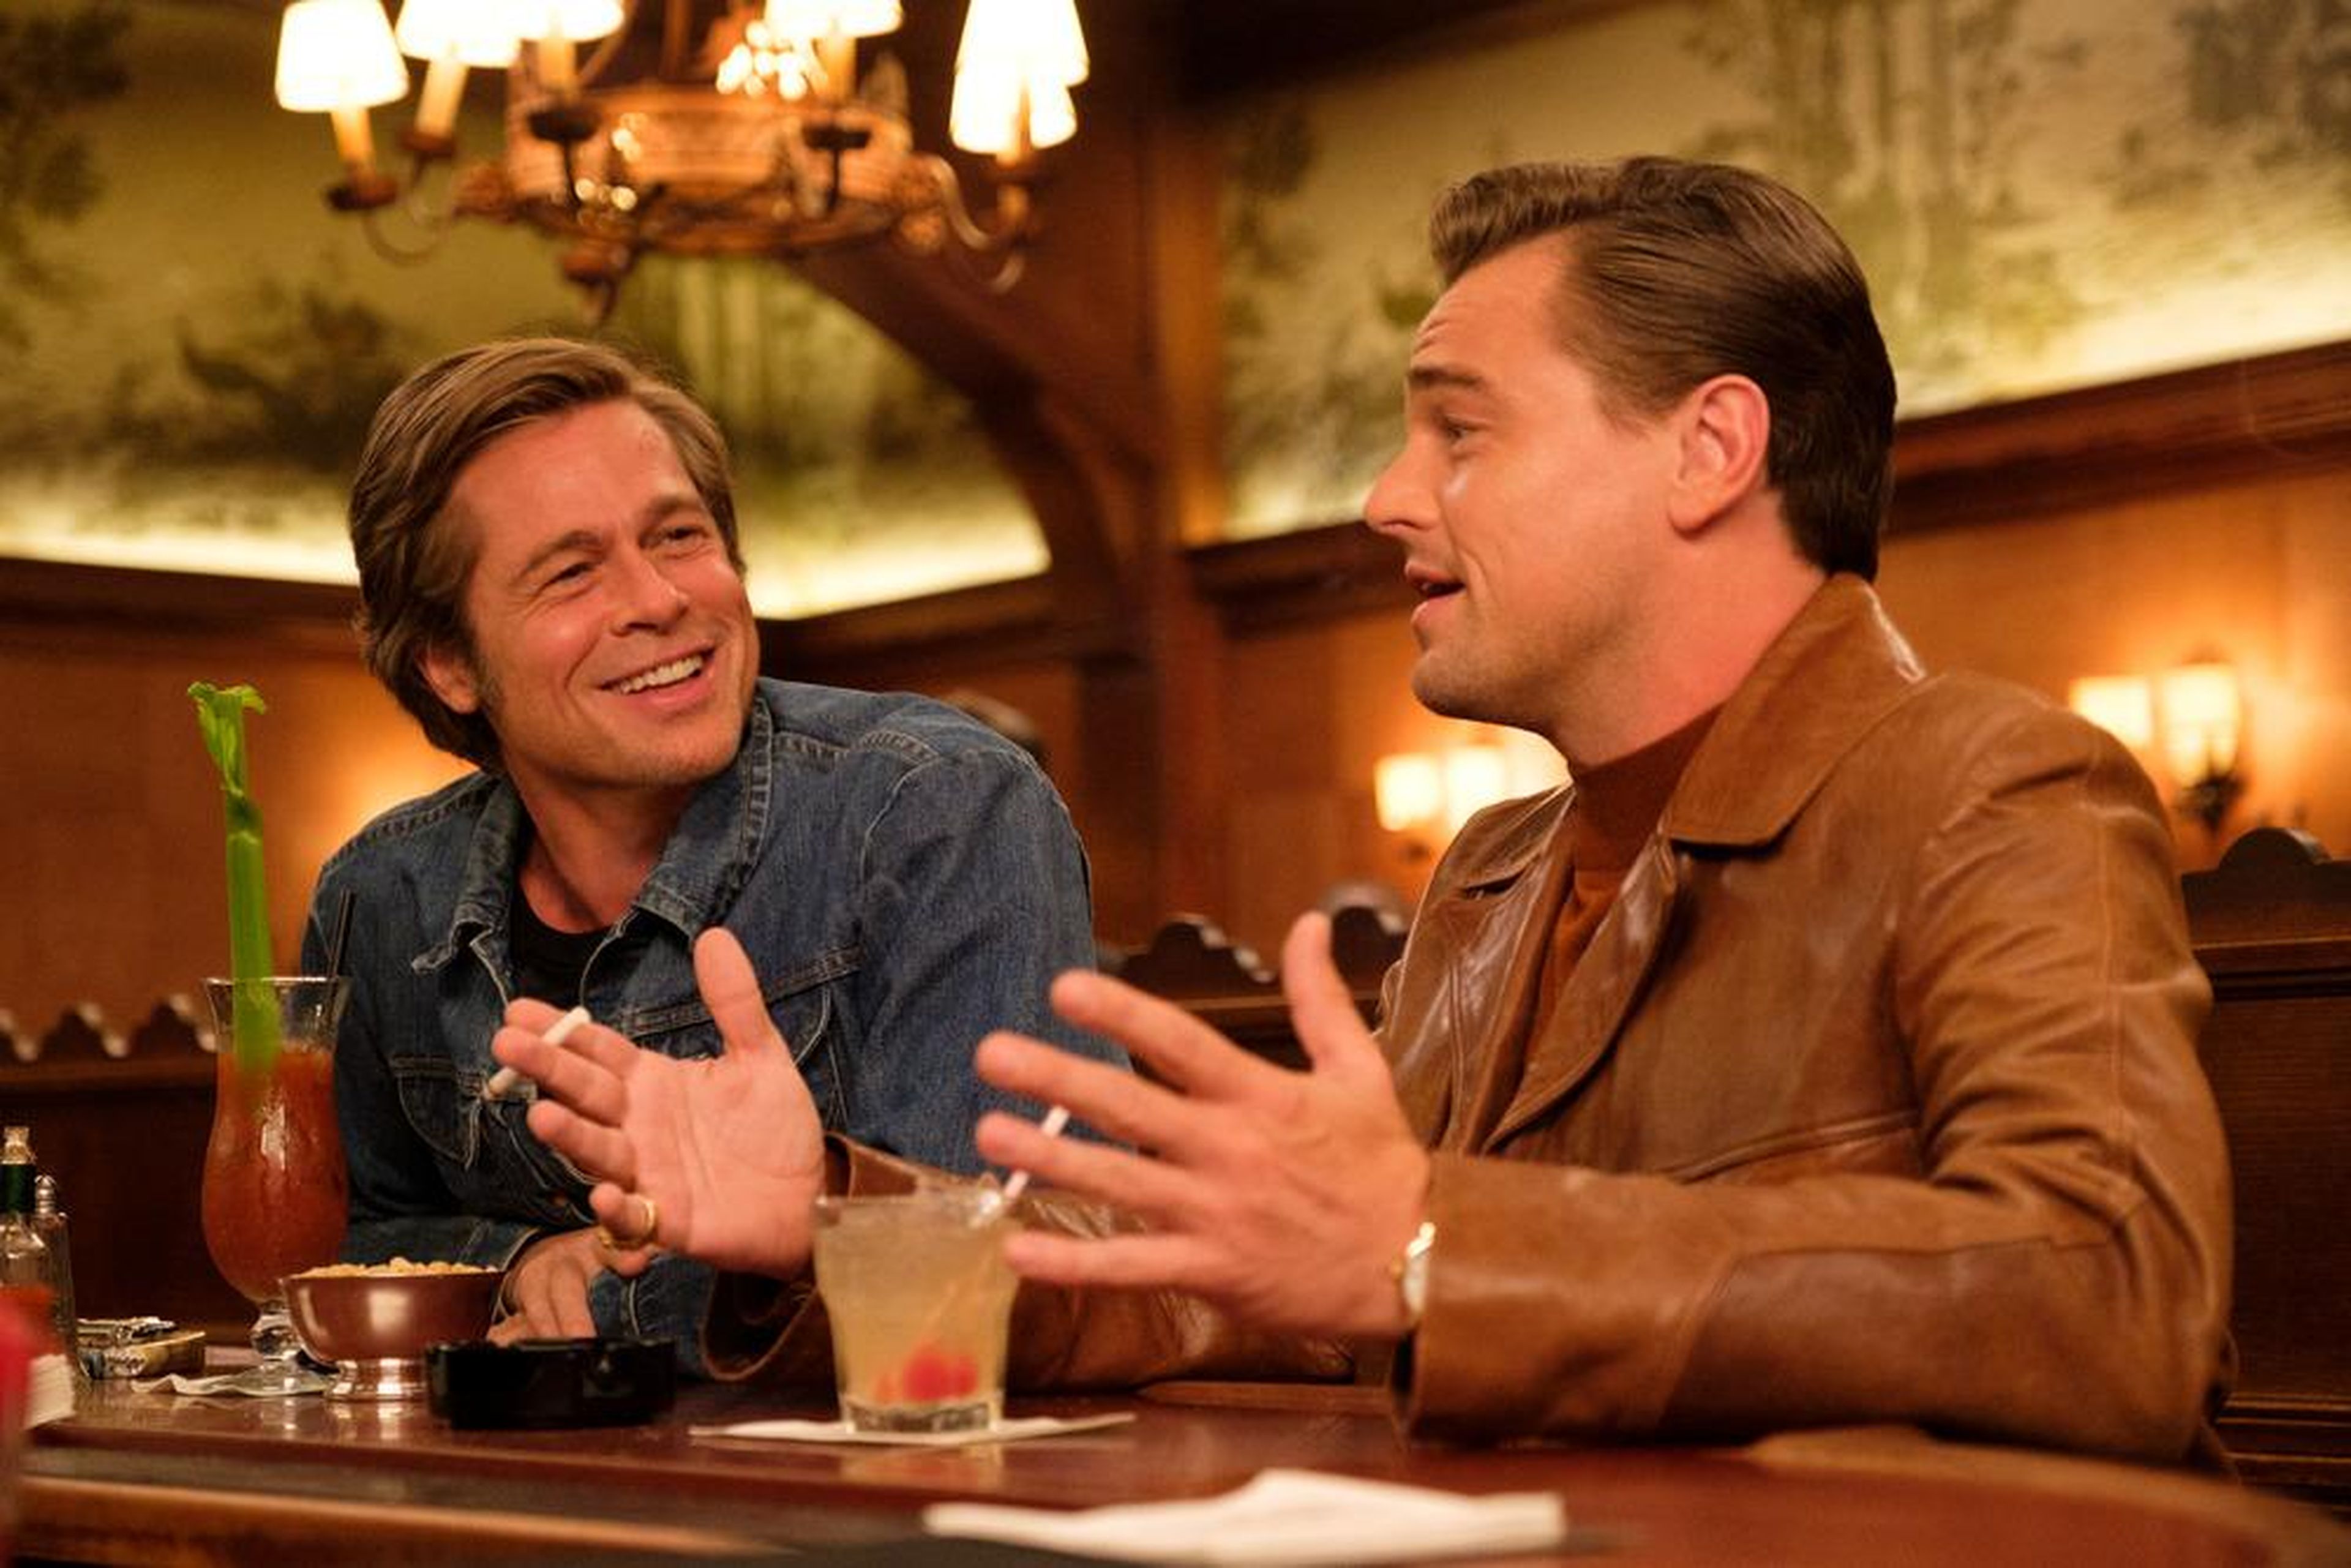 4. “Once Upon a Time… in Hollywood” (2019)